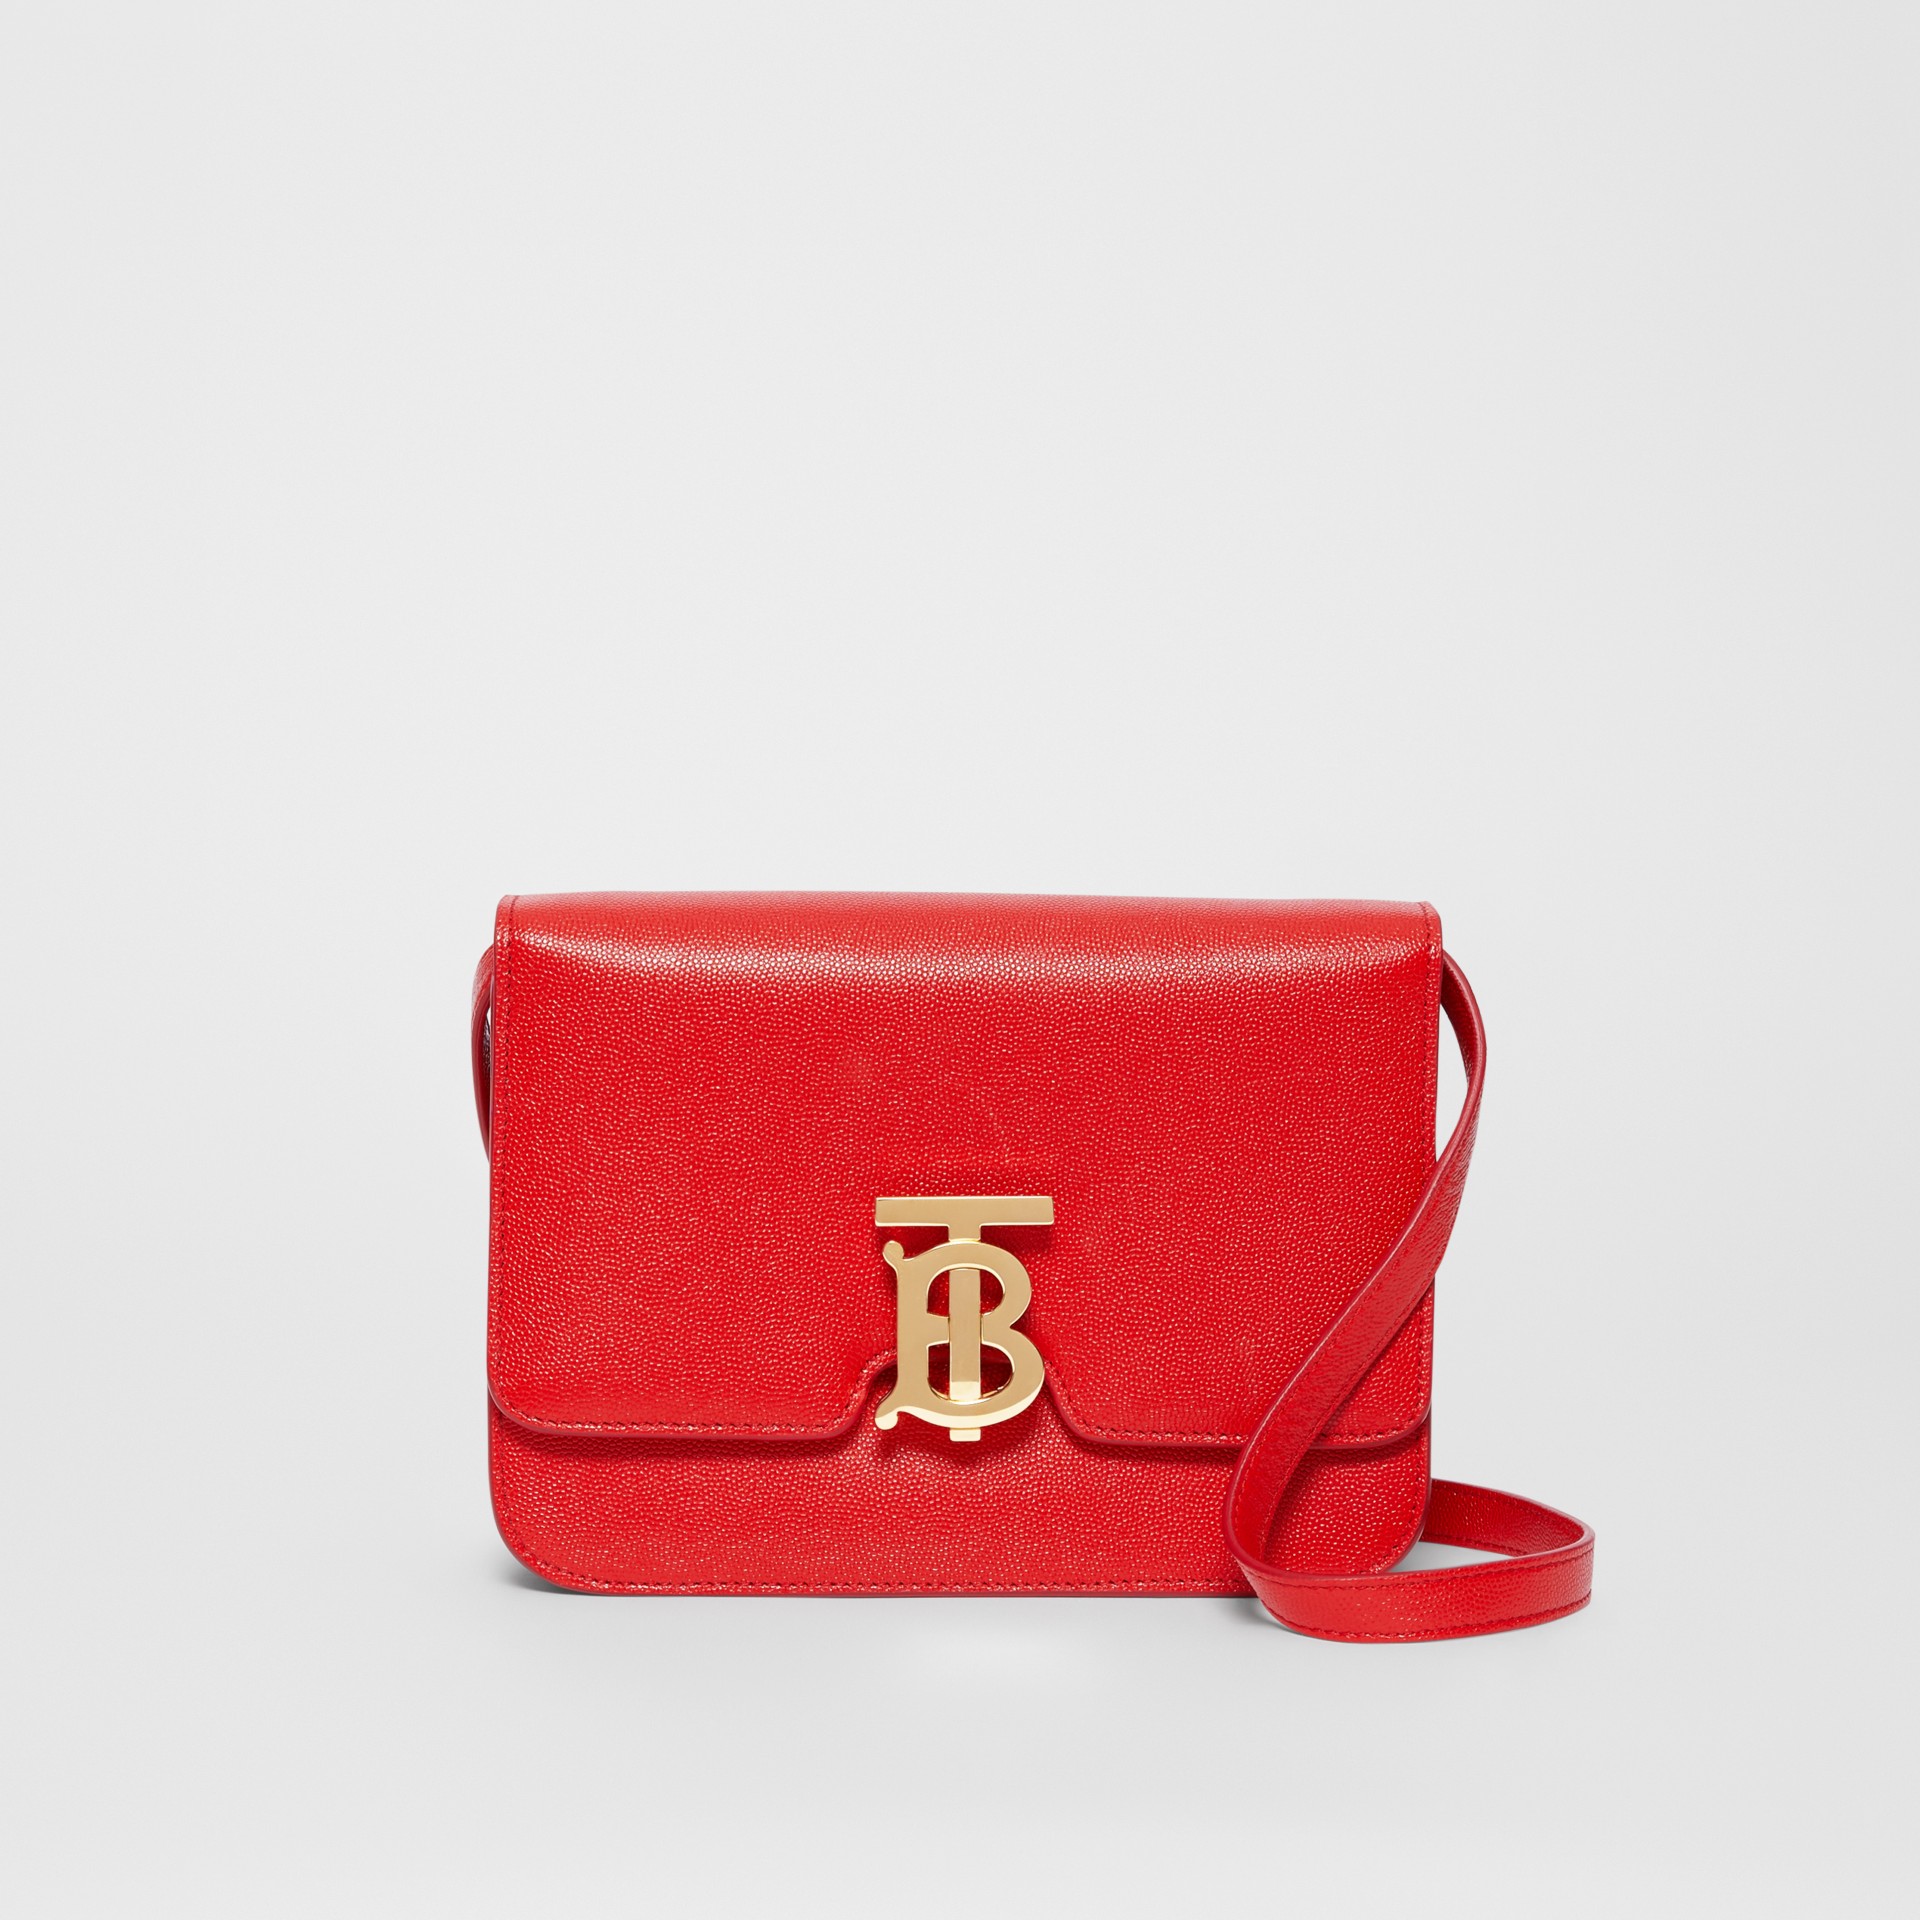 Small Grainy Leather TB Bag in Bright Red - Women | Burberry United States